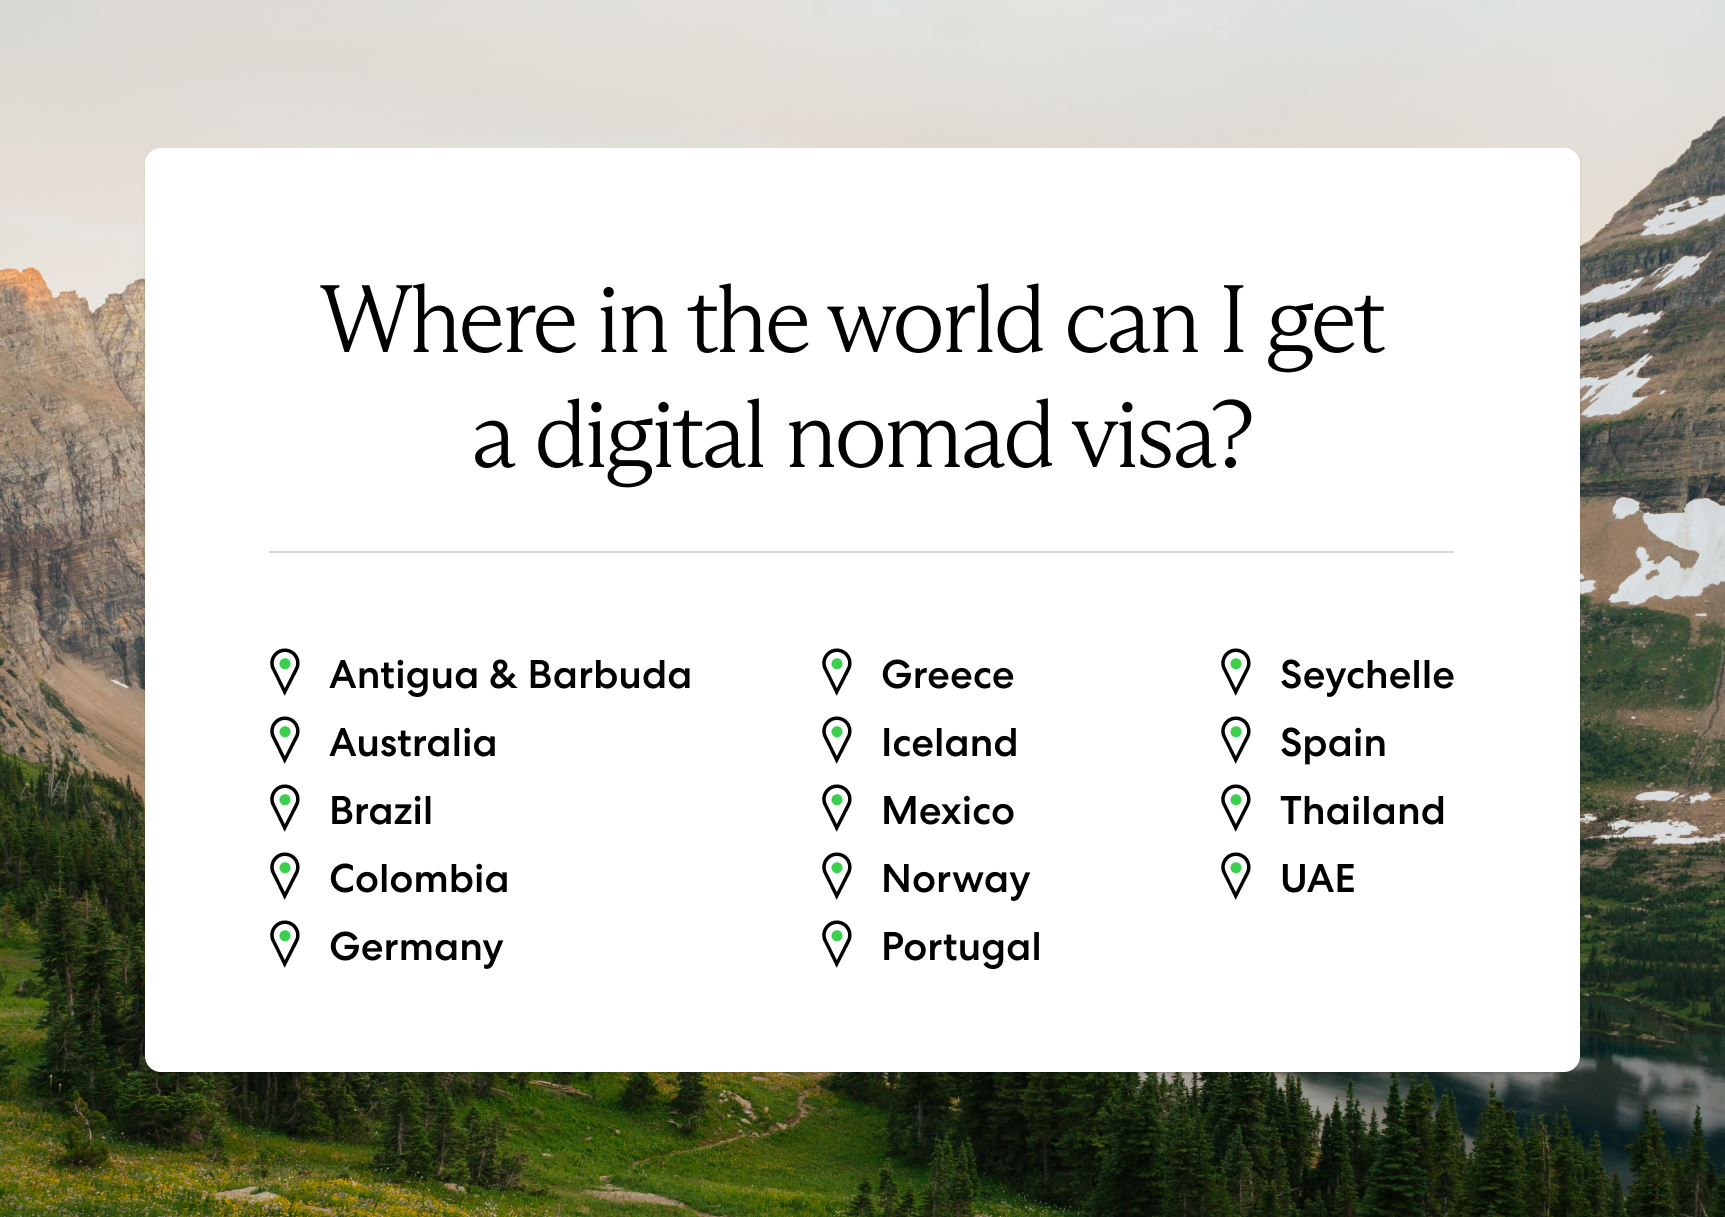 List of countries that allow digital nomad visas.